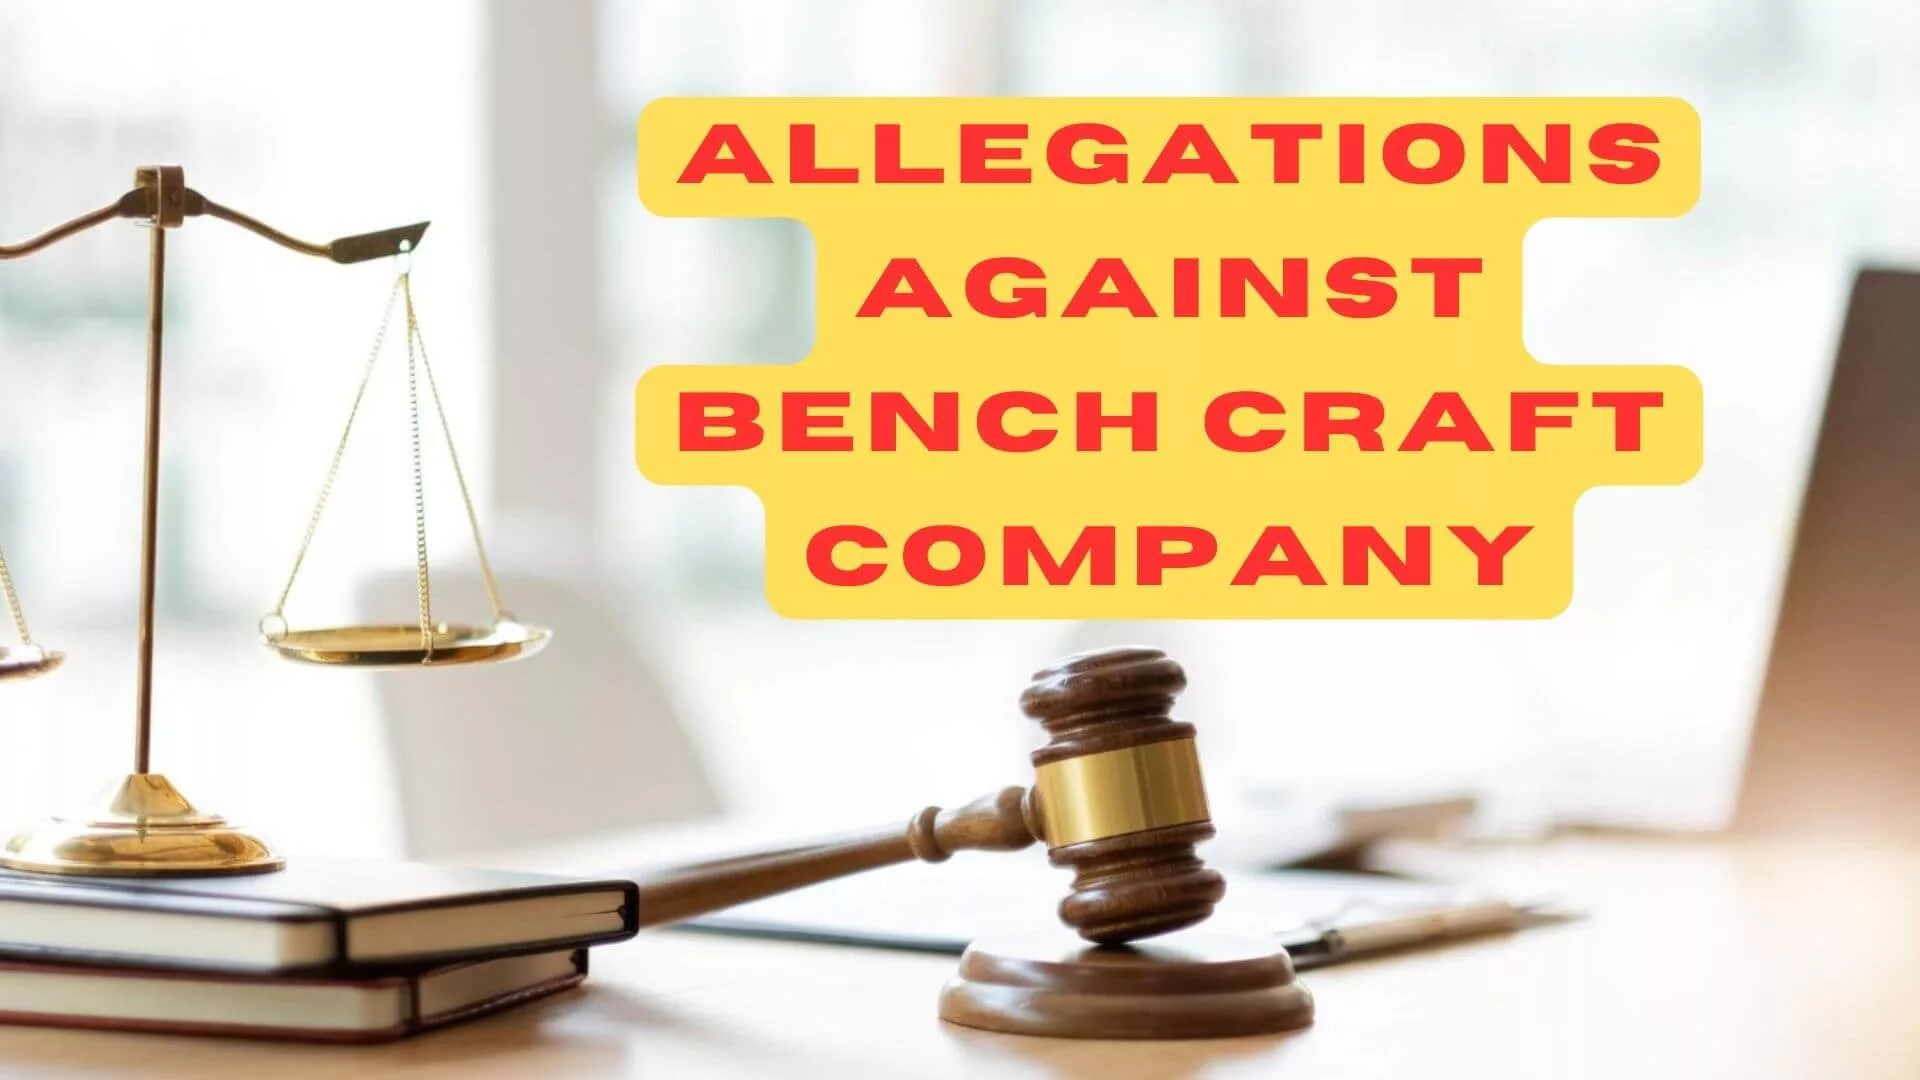 What are the Allegations against Bench Craft Company?